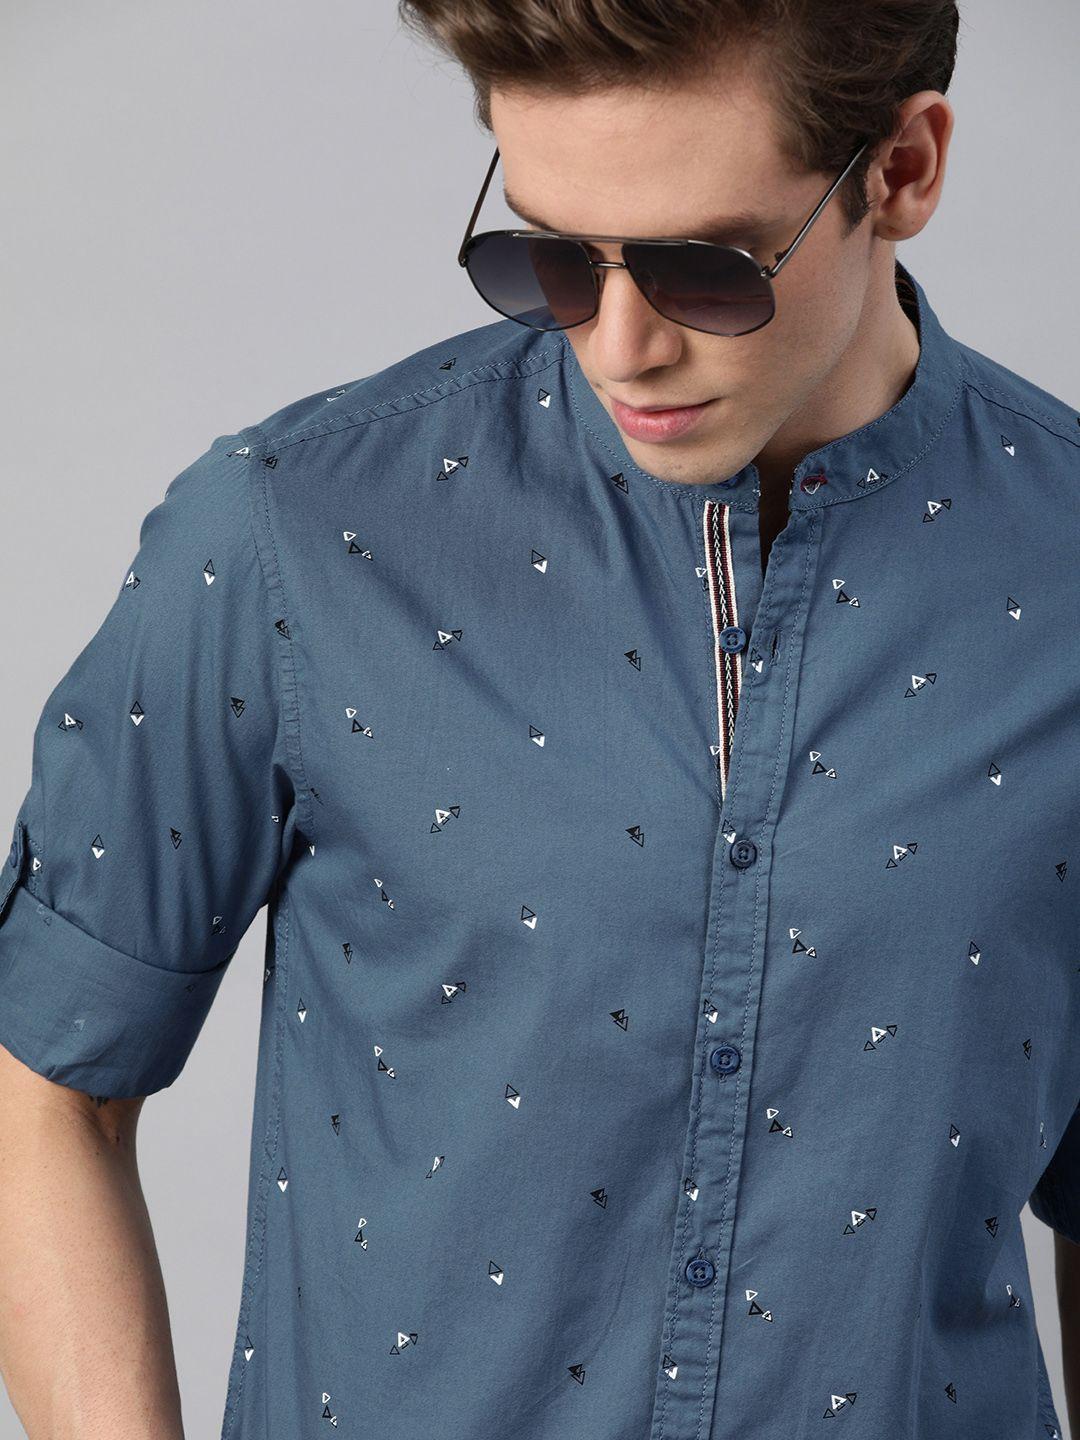 the roadster lifestyle co men teal blue & black regular fit printed sustainable casual shirt